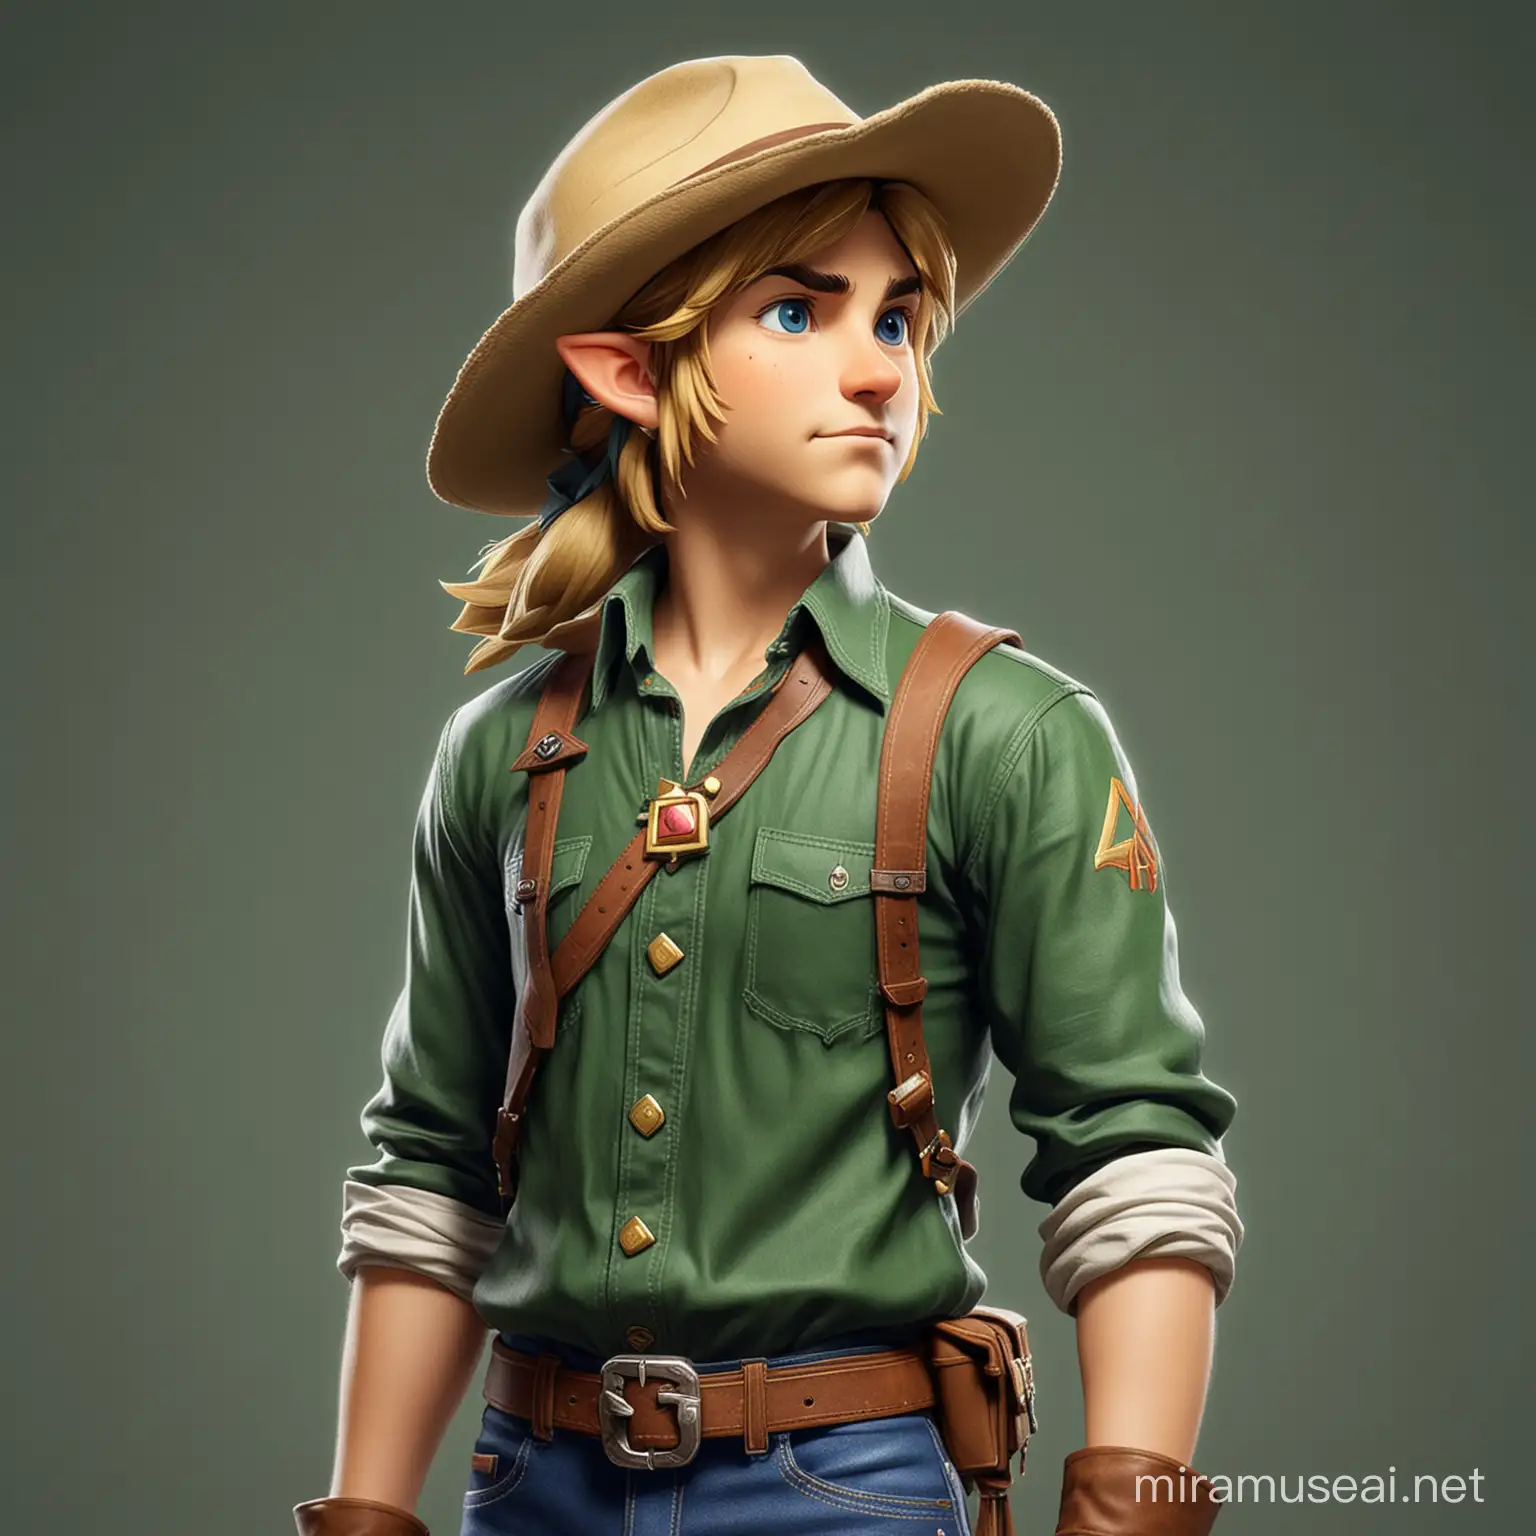 Link from The Legend of Zelda in Cowboy Hat and Collared Shirt Side Profile Portrait